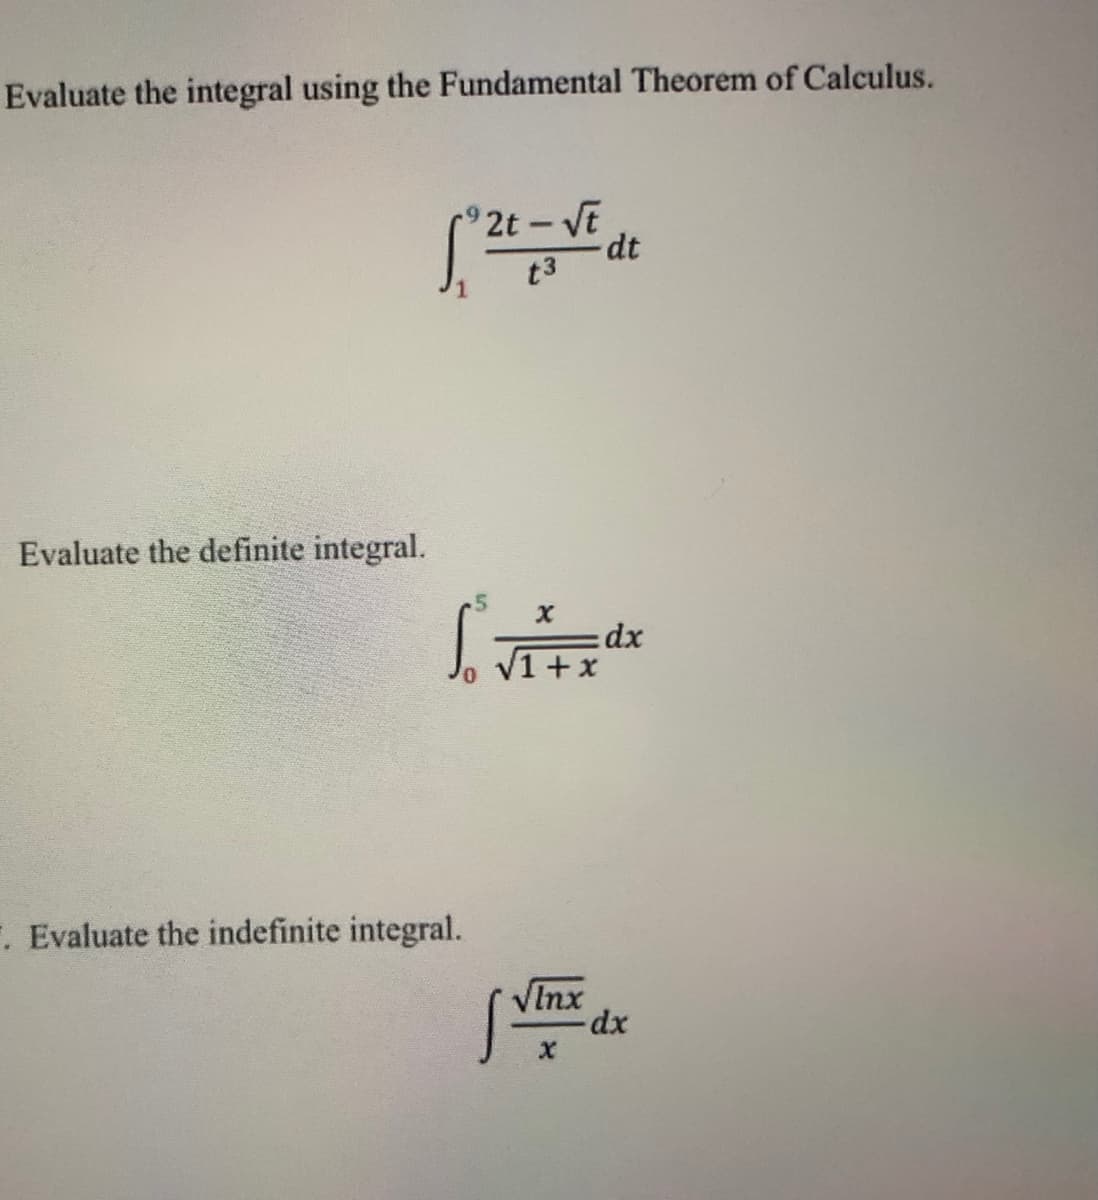 Evaluate the integral using the Fundamental Theorem of Calculus.
2t-VE
dt
t3
Evaluate the definite integral.
dx
V1 + x
F. Evaluate the indefinite integral.
VInx
